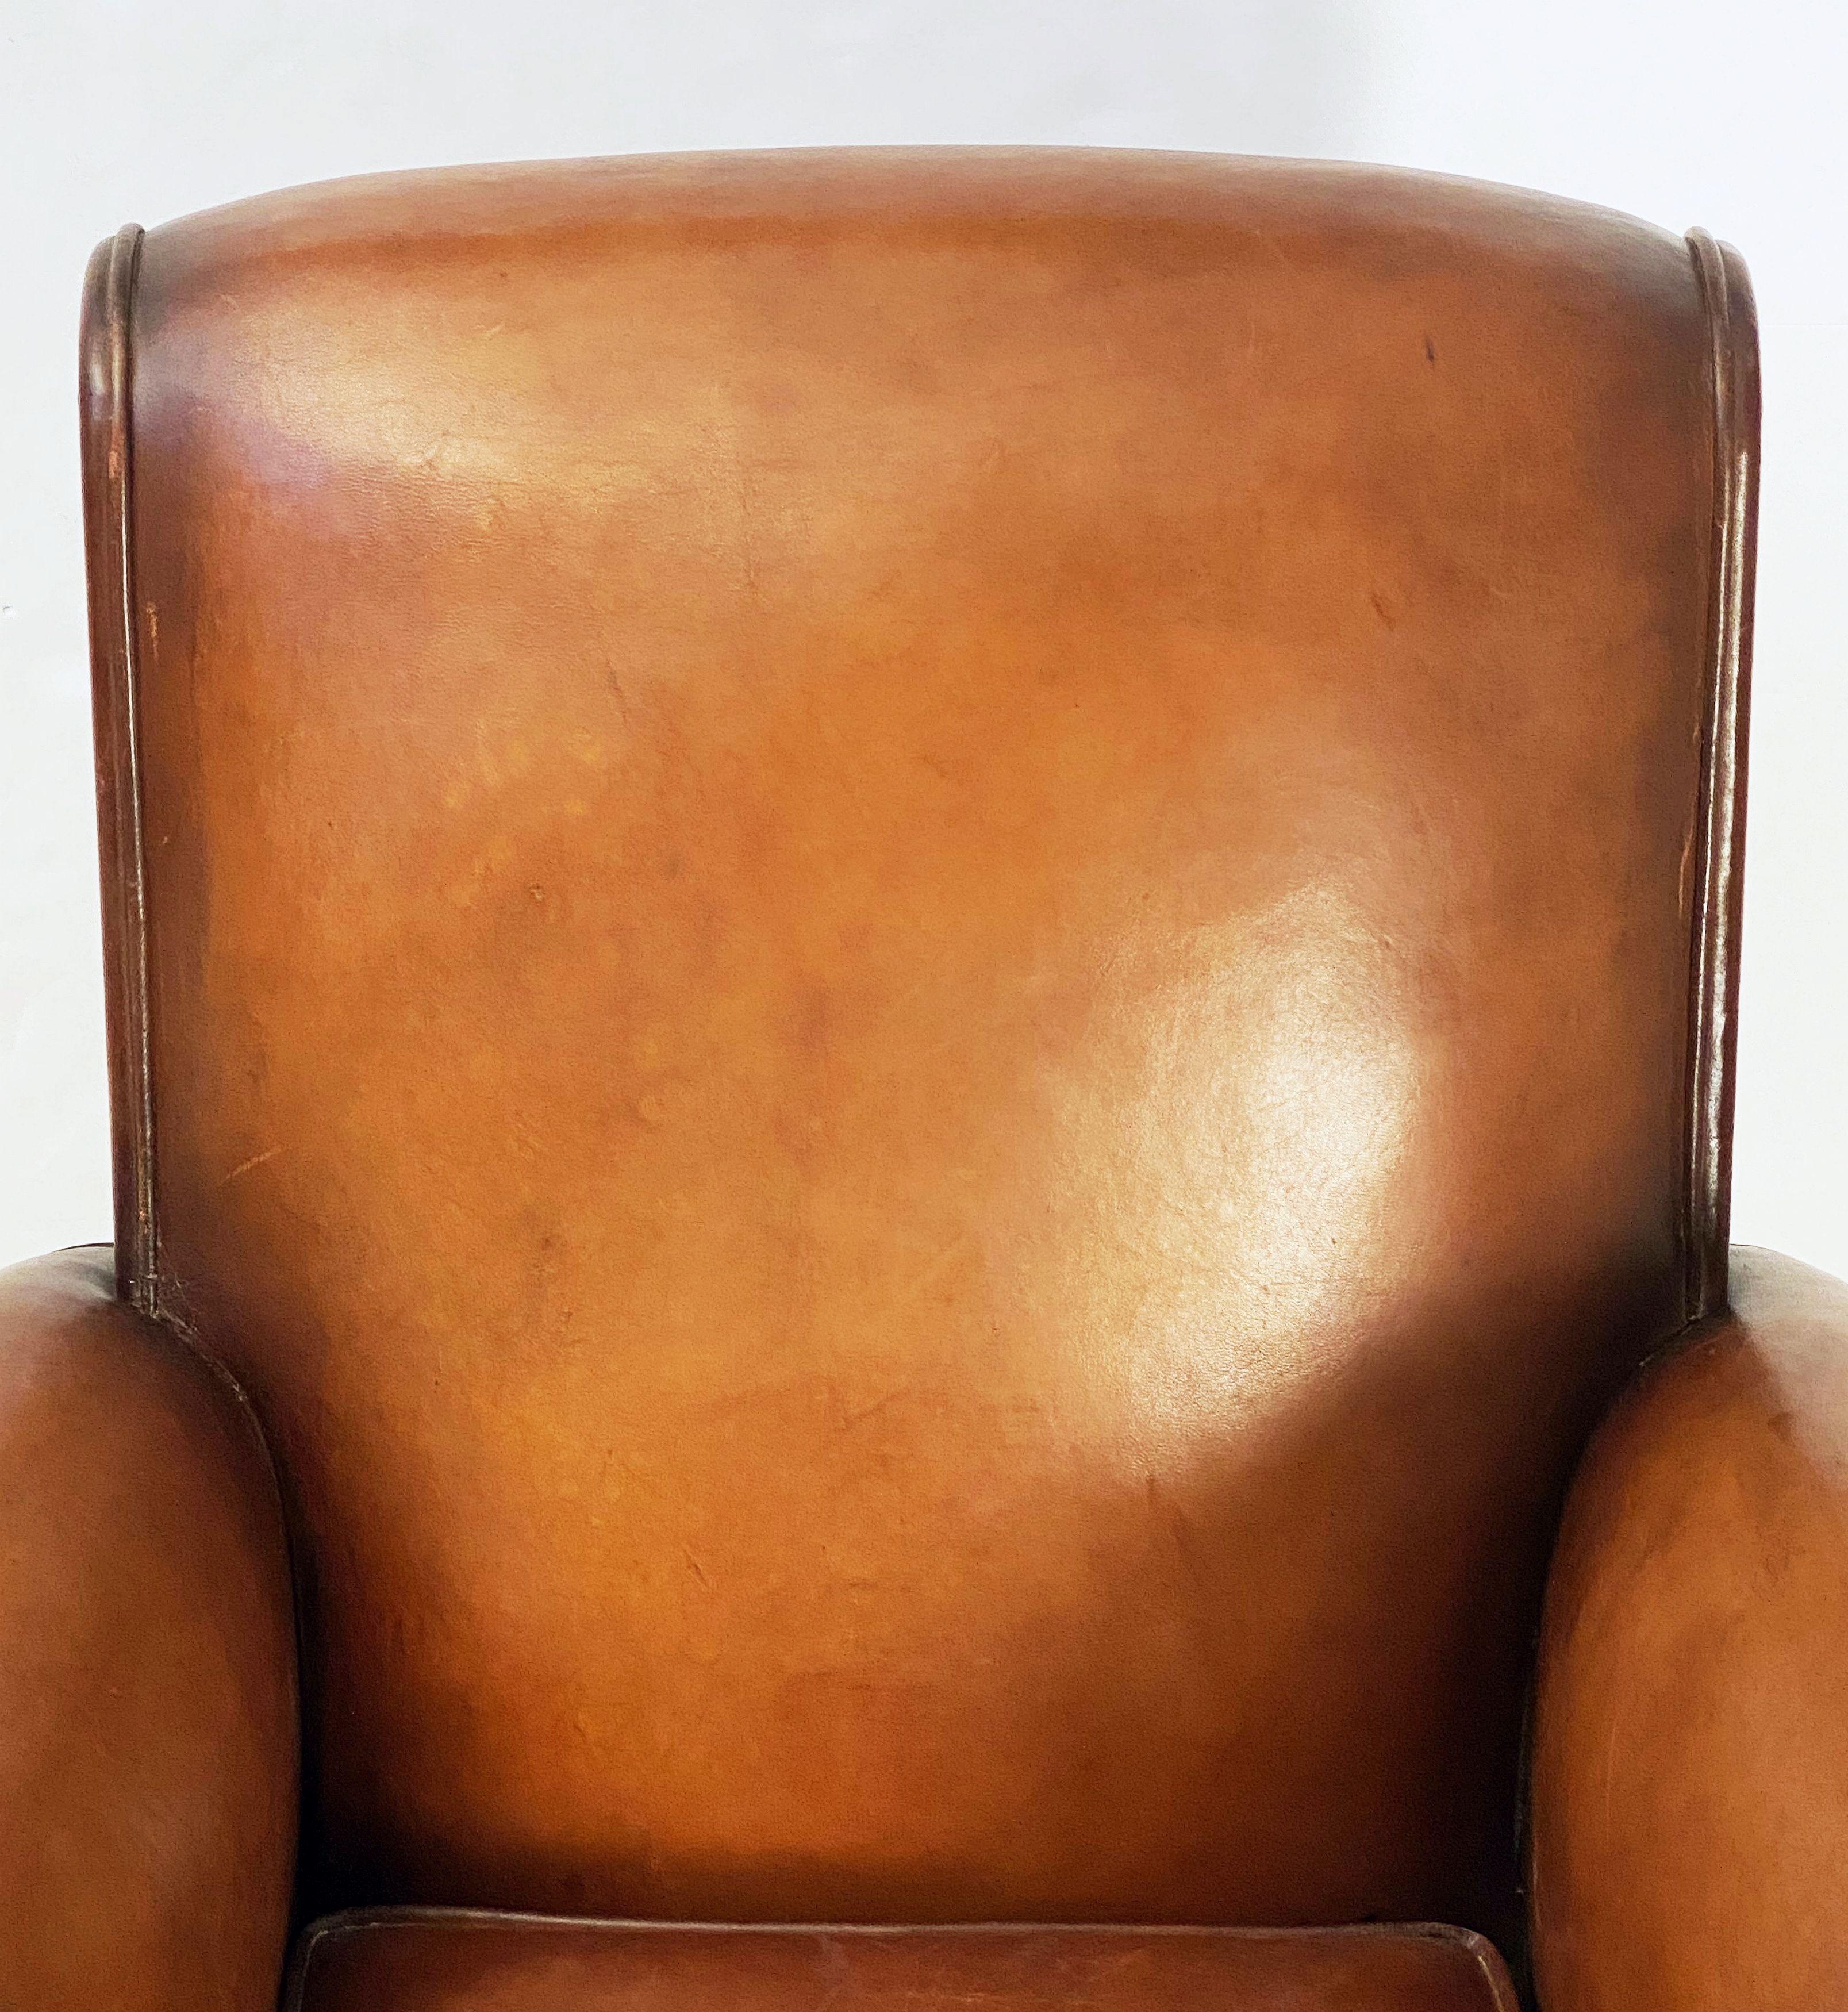 20th Century Vintage French Leather Club or Lounge Chair from the Art Deco Era